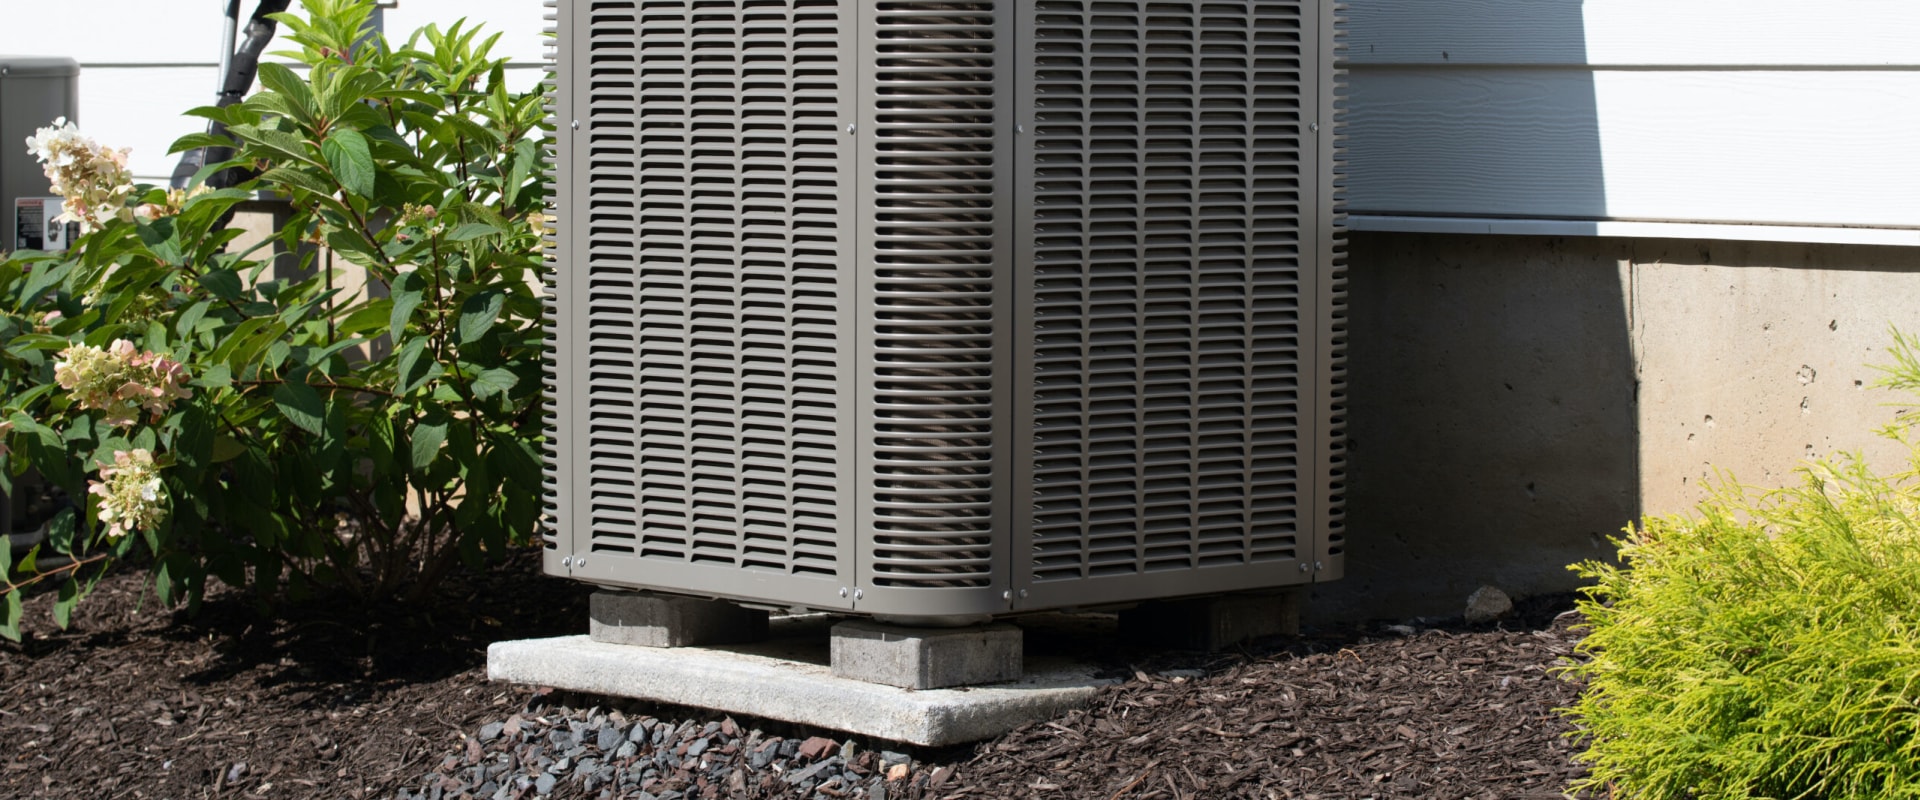 Are HVAC Prices Going Down in 2023? - An Expert's Perspective